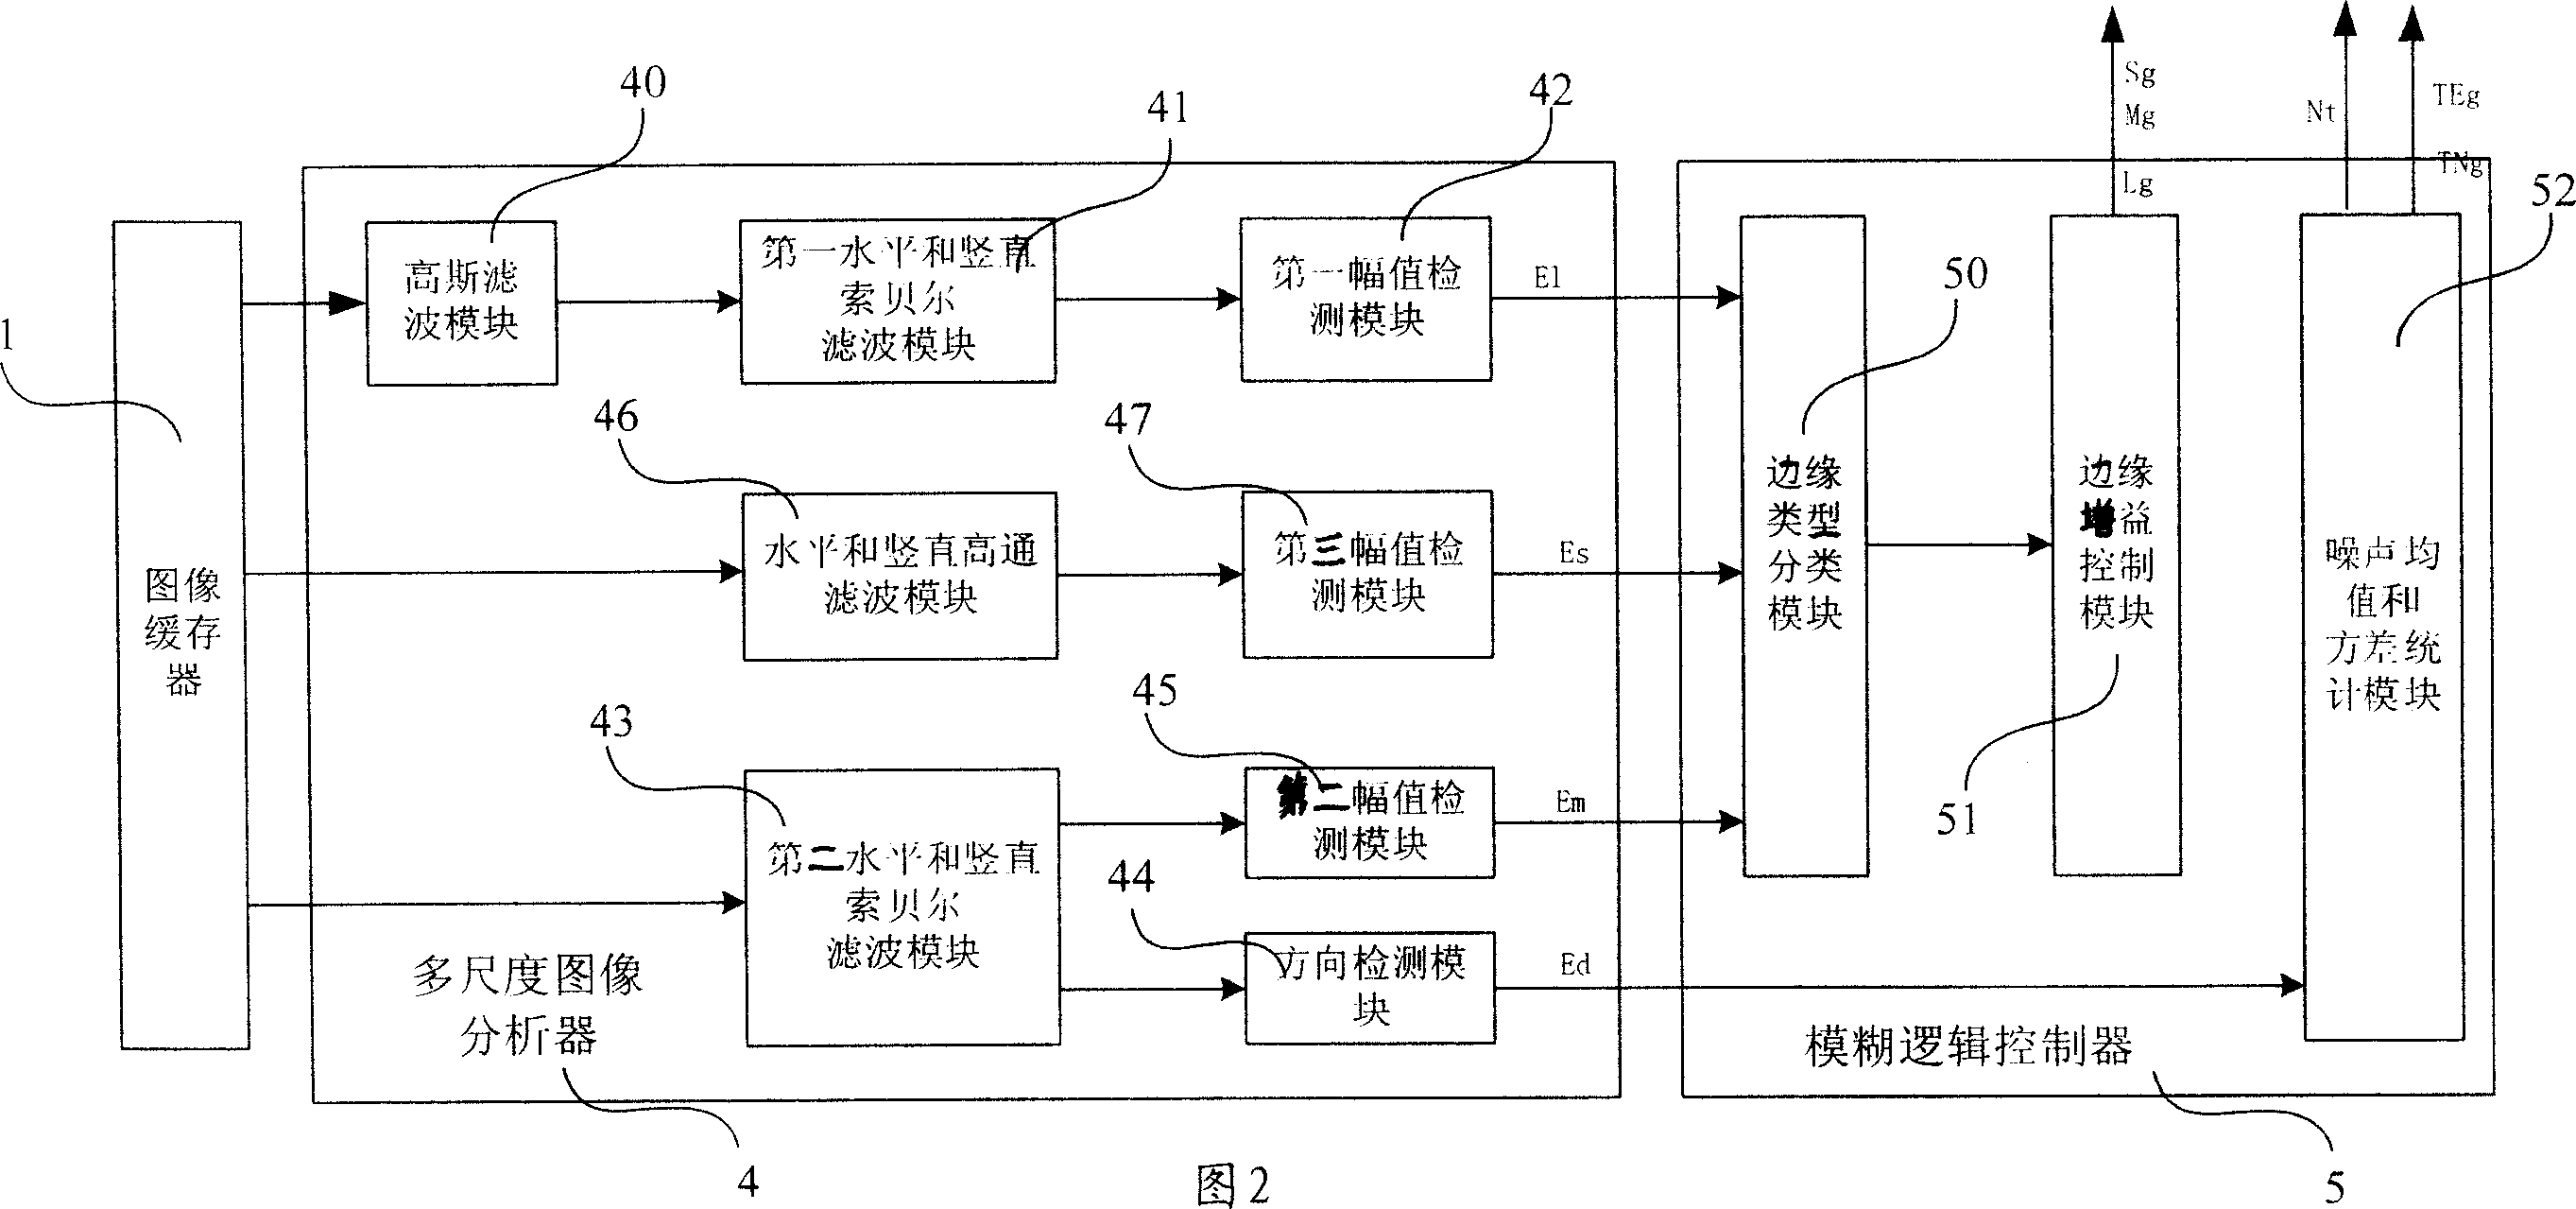 Picture reinforcing treatment system and treatment method